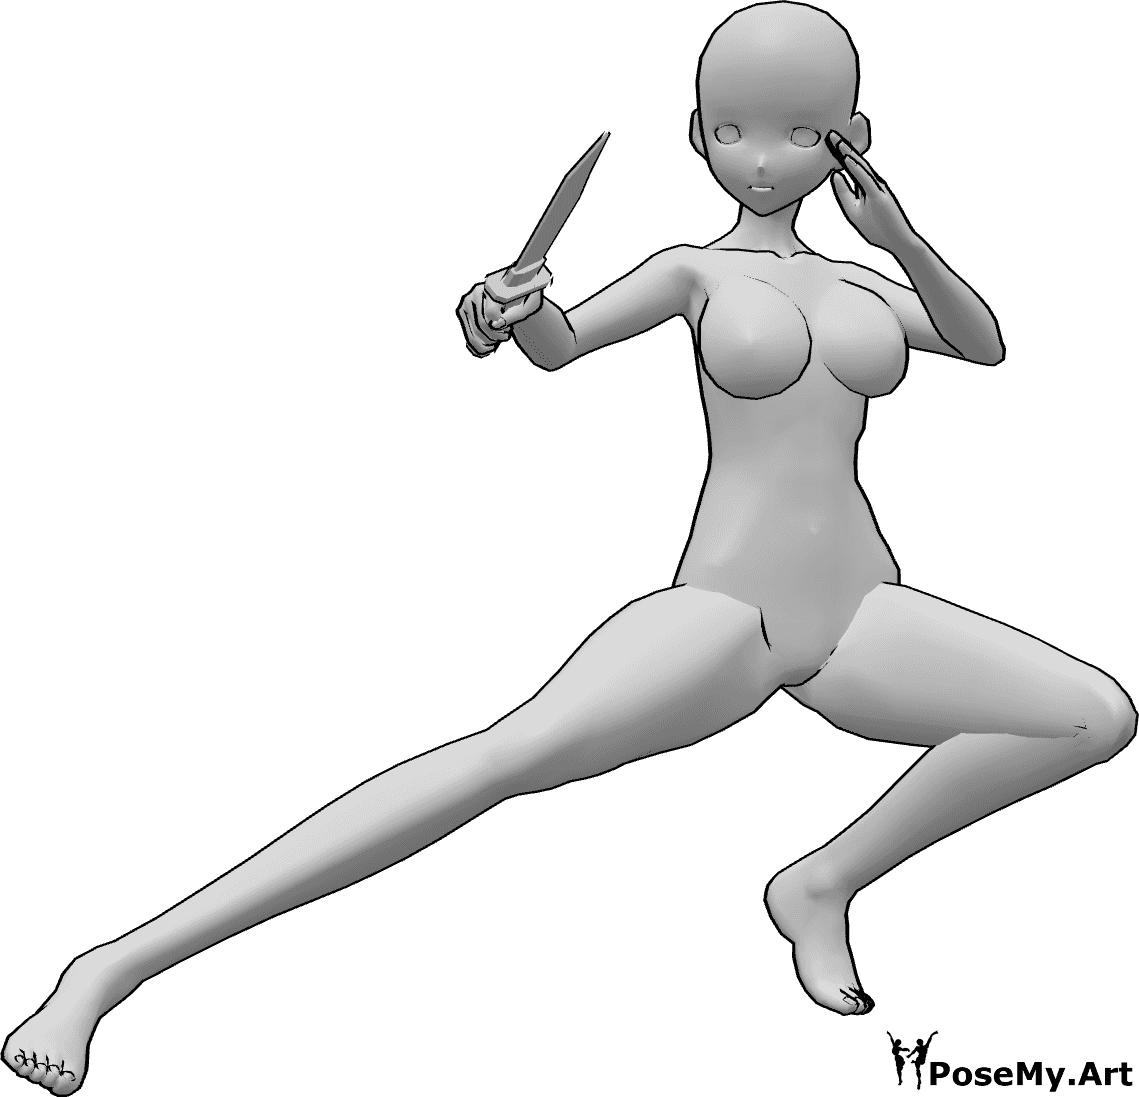 Pose Reference- Anime squatting knife pose - Anime female is squatting and holding a knife in her right hand